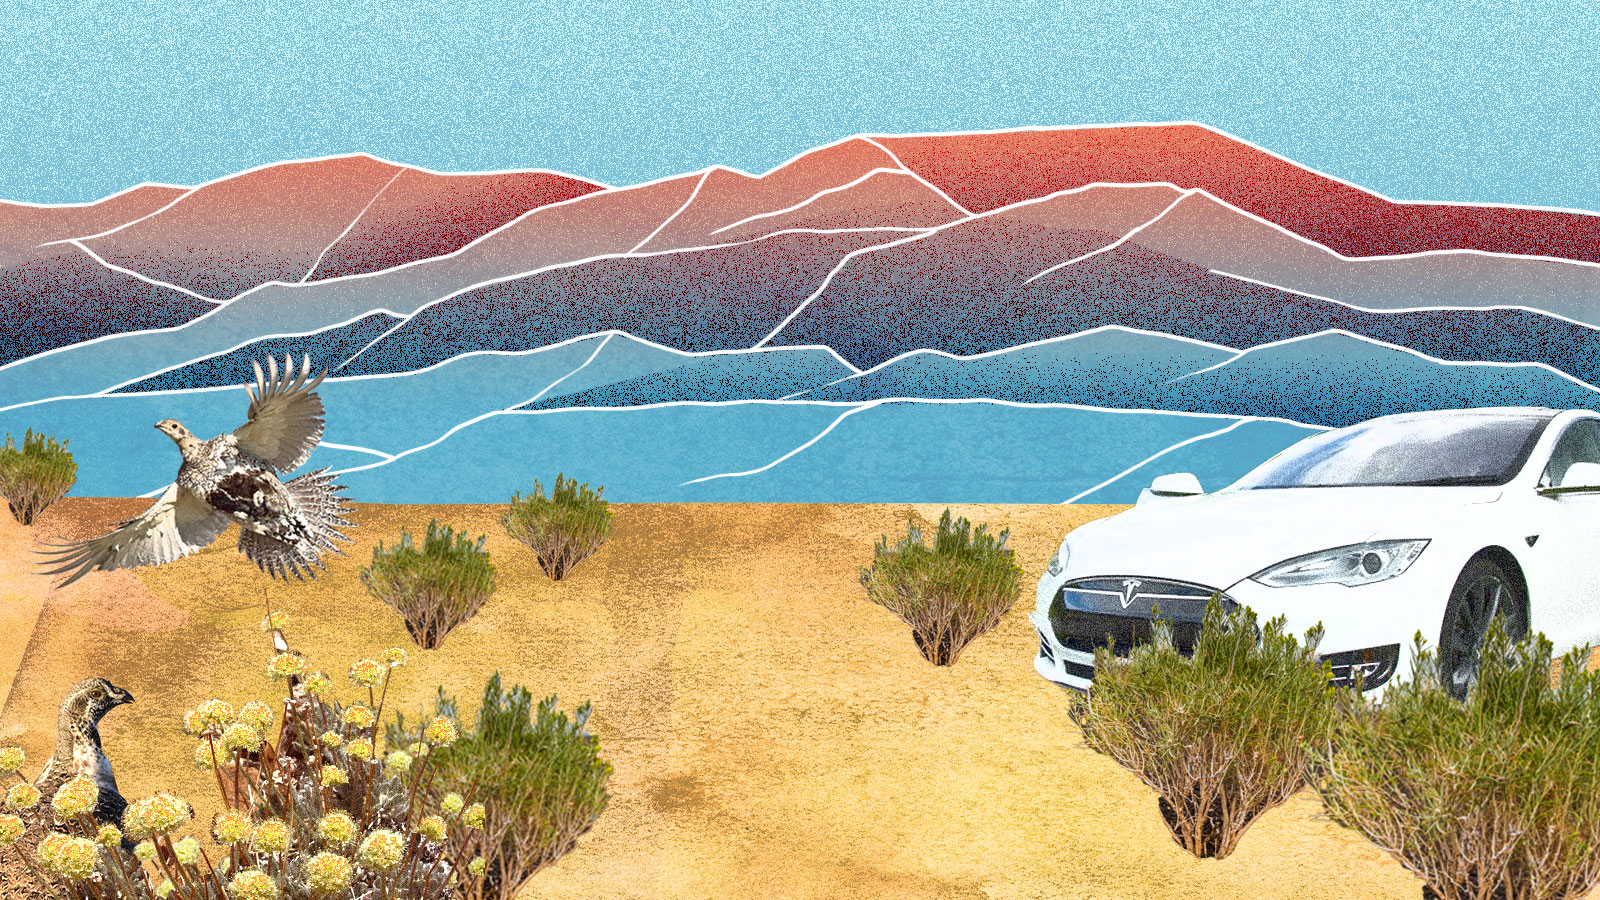 An illustration of Nevada's Thacker pass. In the background are hand-drawn mountains in sunset colors. In the foreground, an electric car is parked among patches of buckwheat and brush. A bird is about to take flight on the left side of the image.